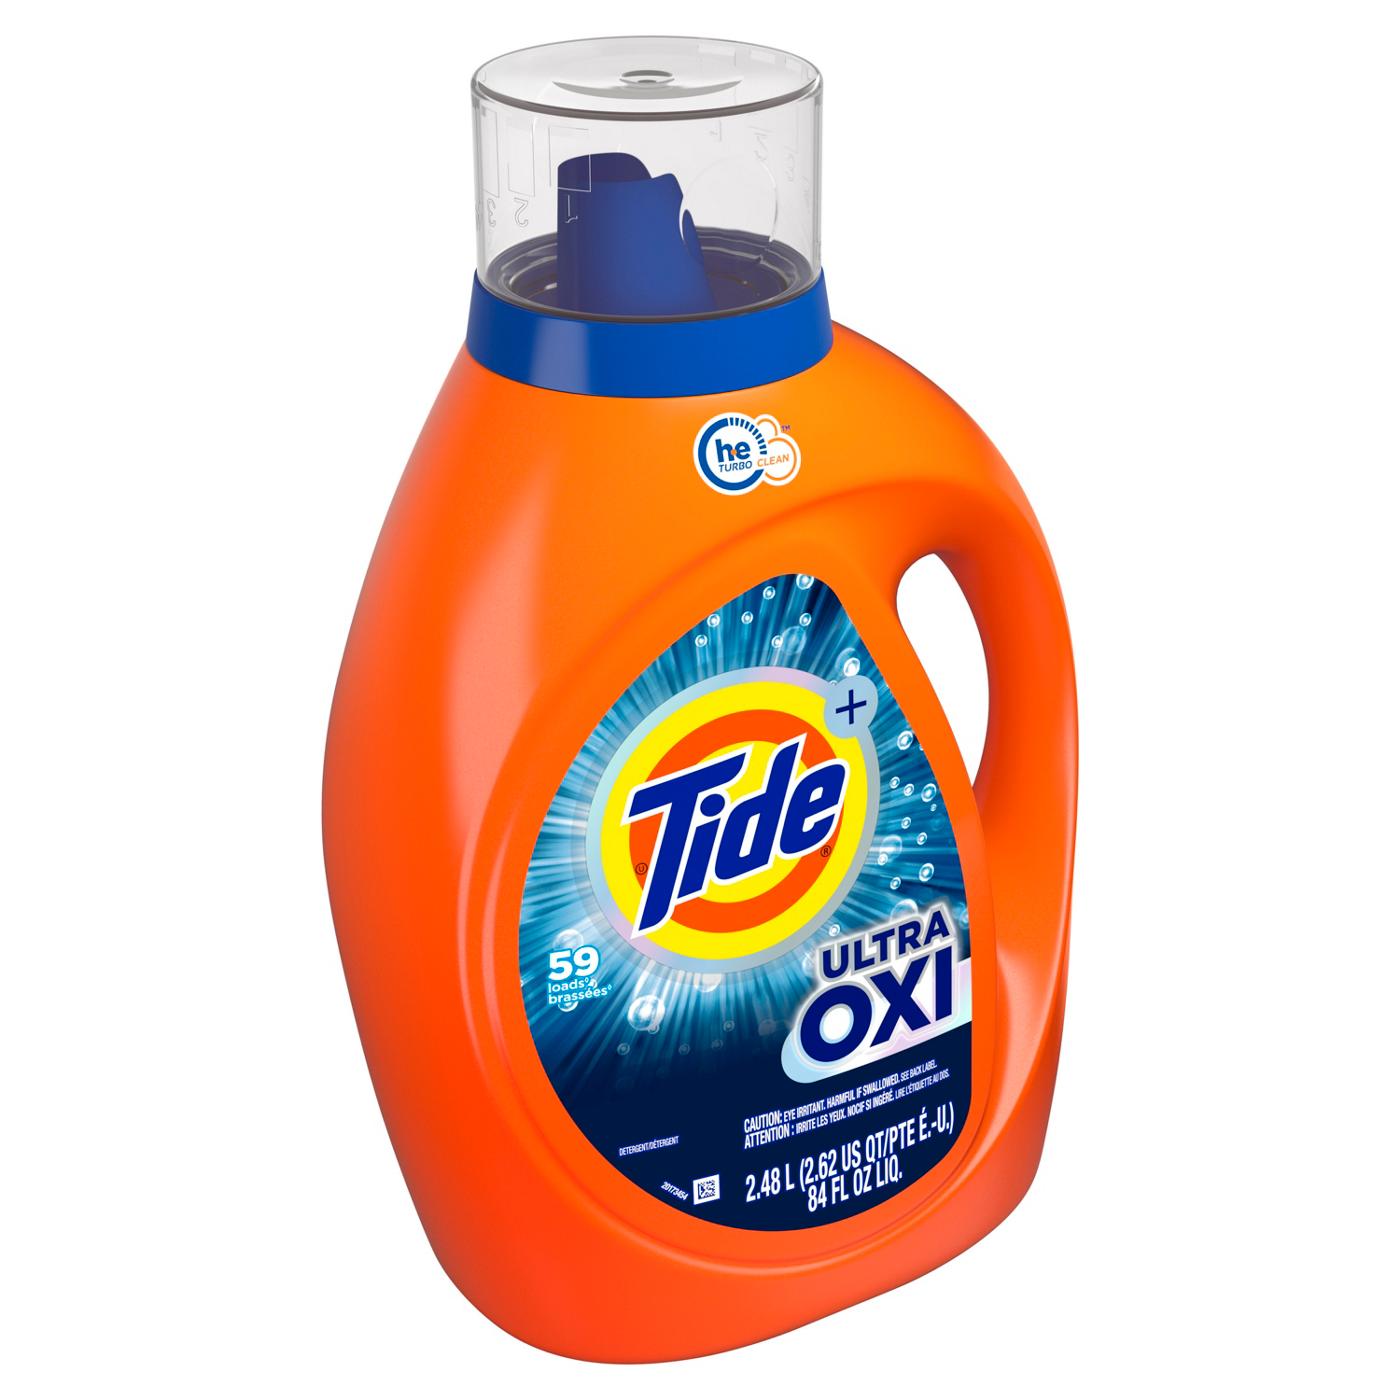 Tide + Ultra OXI HE Turbo Clean Liquid Laundry Detergent, 59 Loads; image 8 of 9